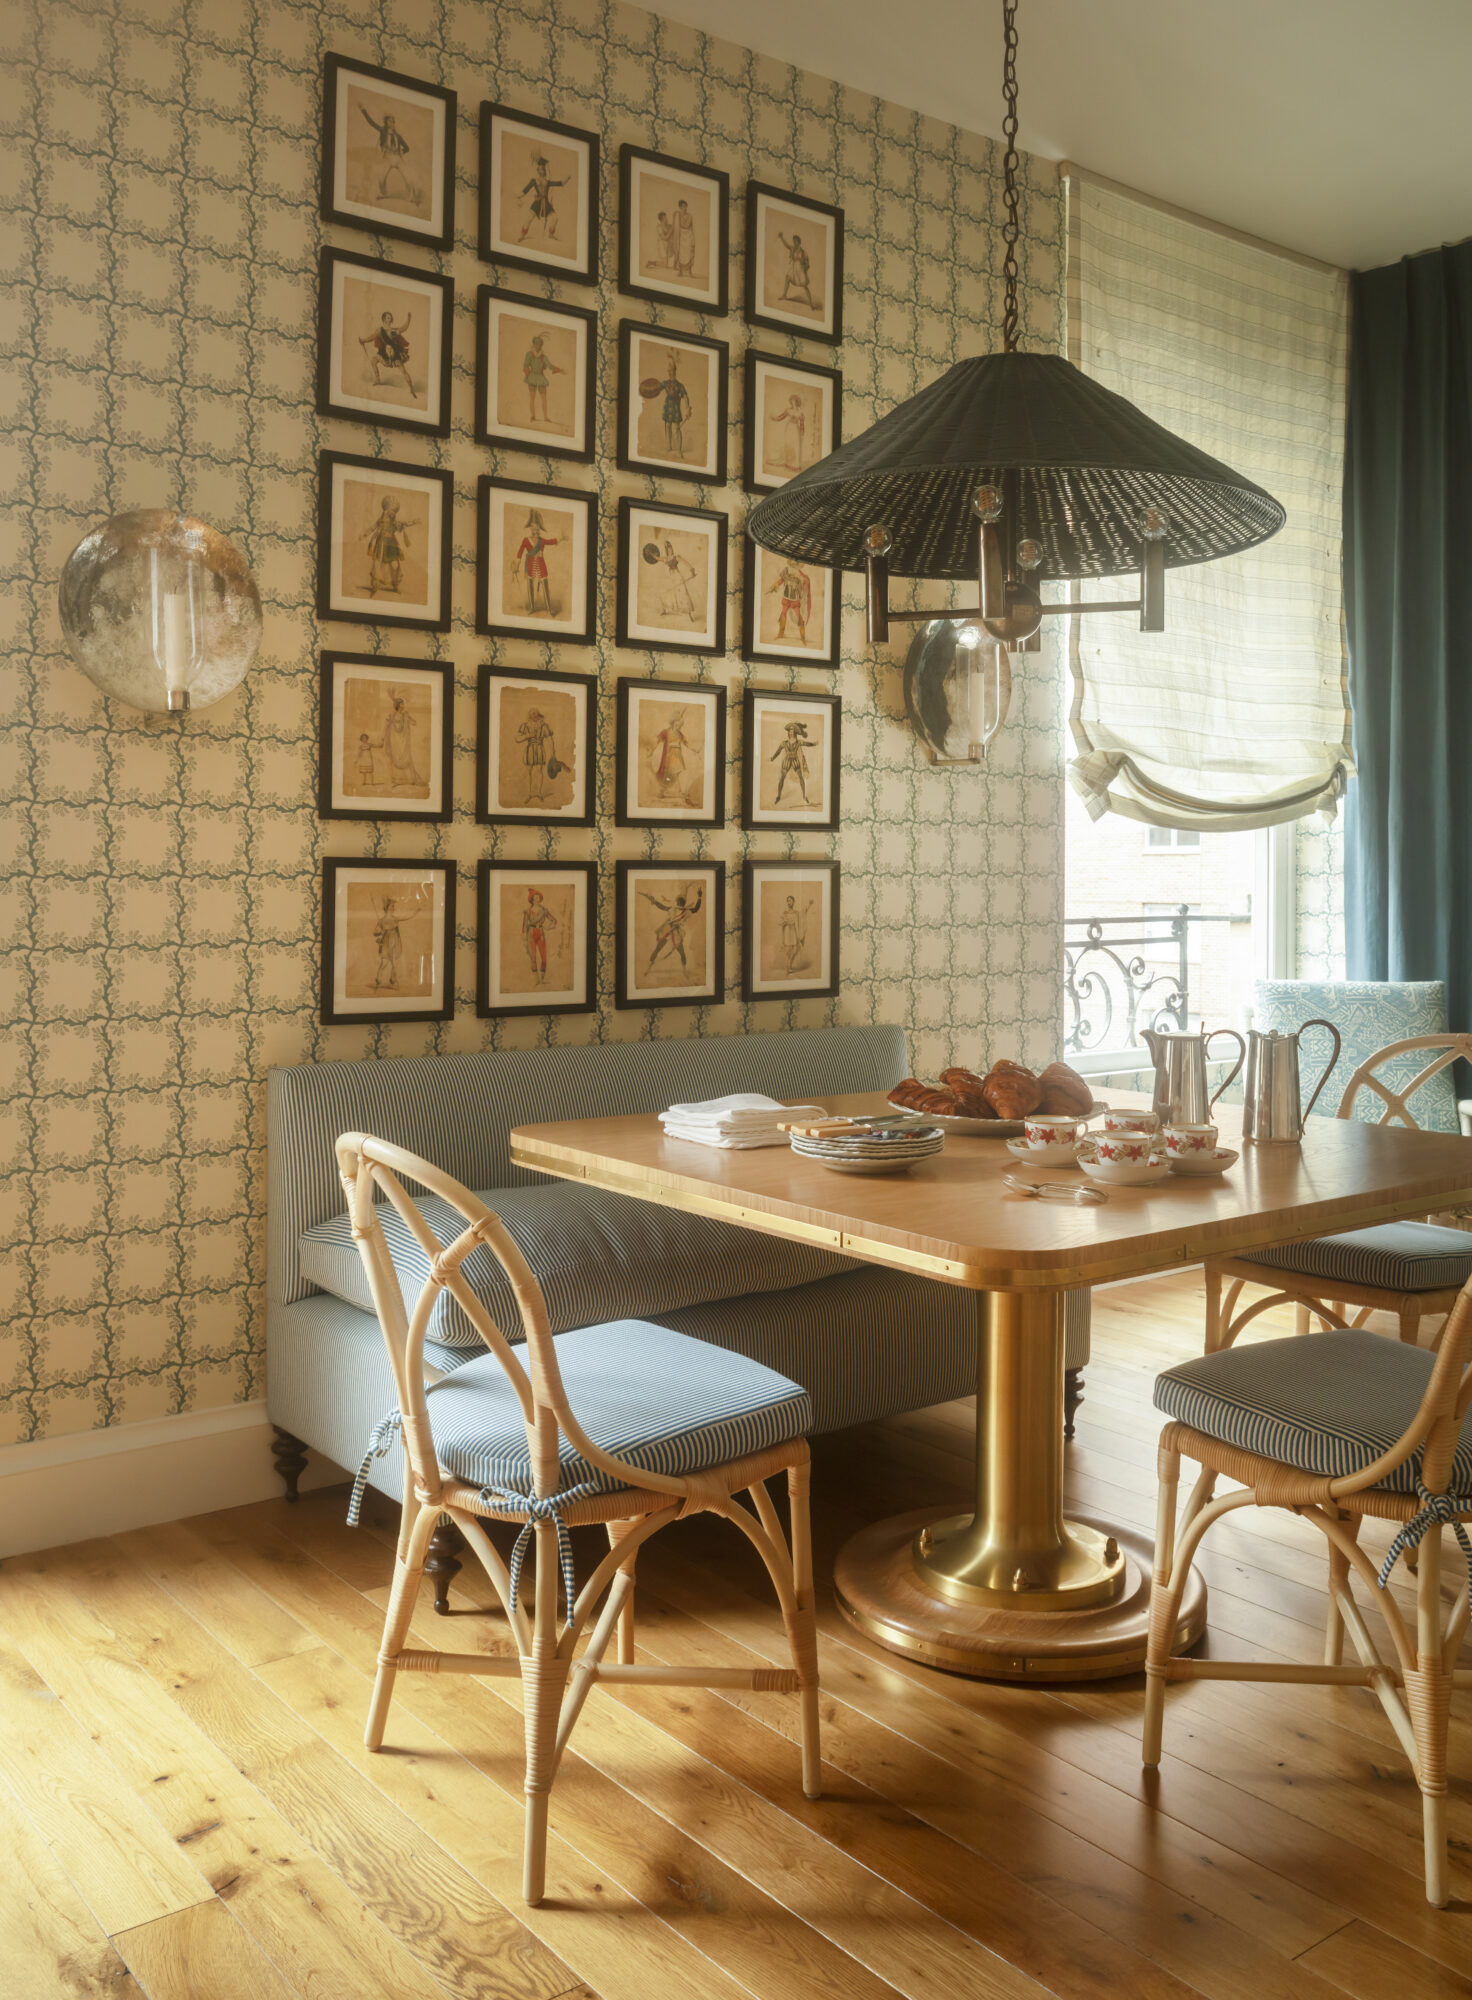 Breakfast nook with patterned wallpaper, rattan chairs, a pleated pendant light and a mosaic of small artworks